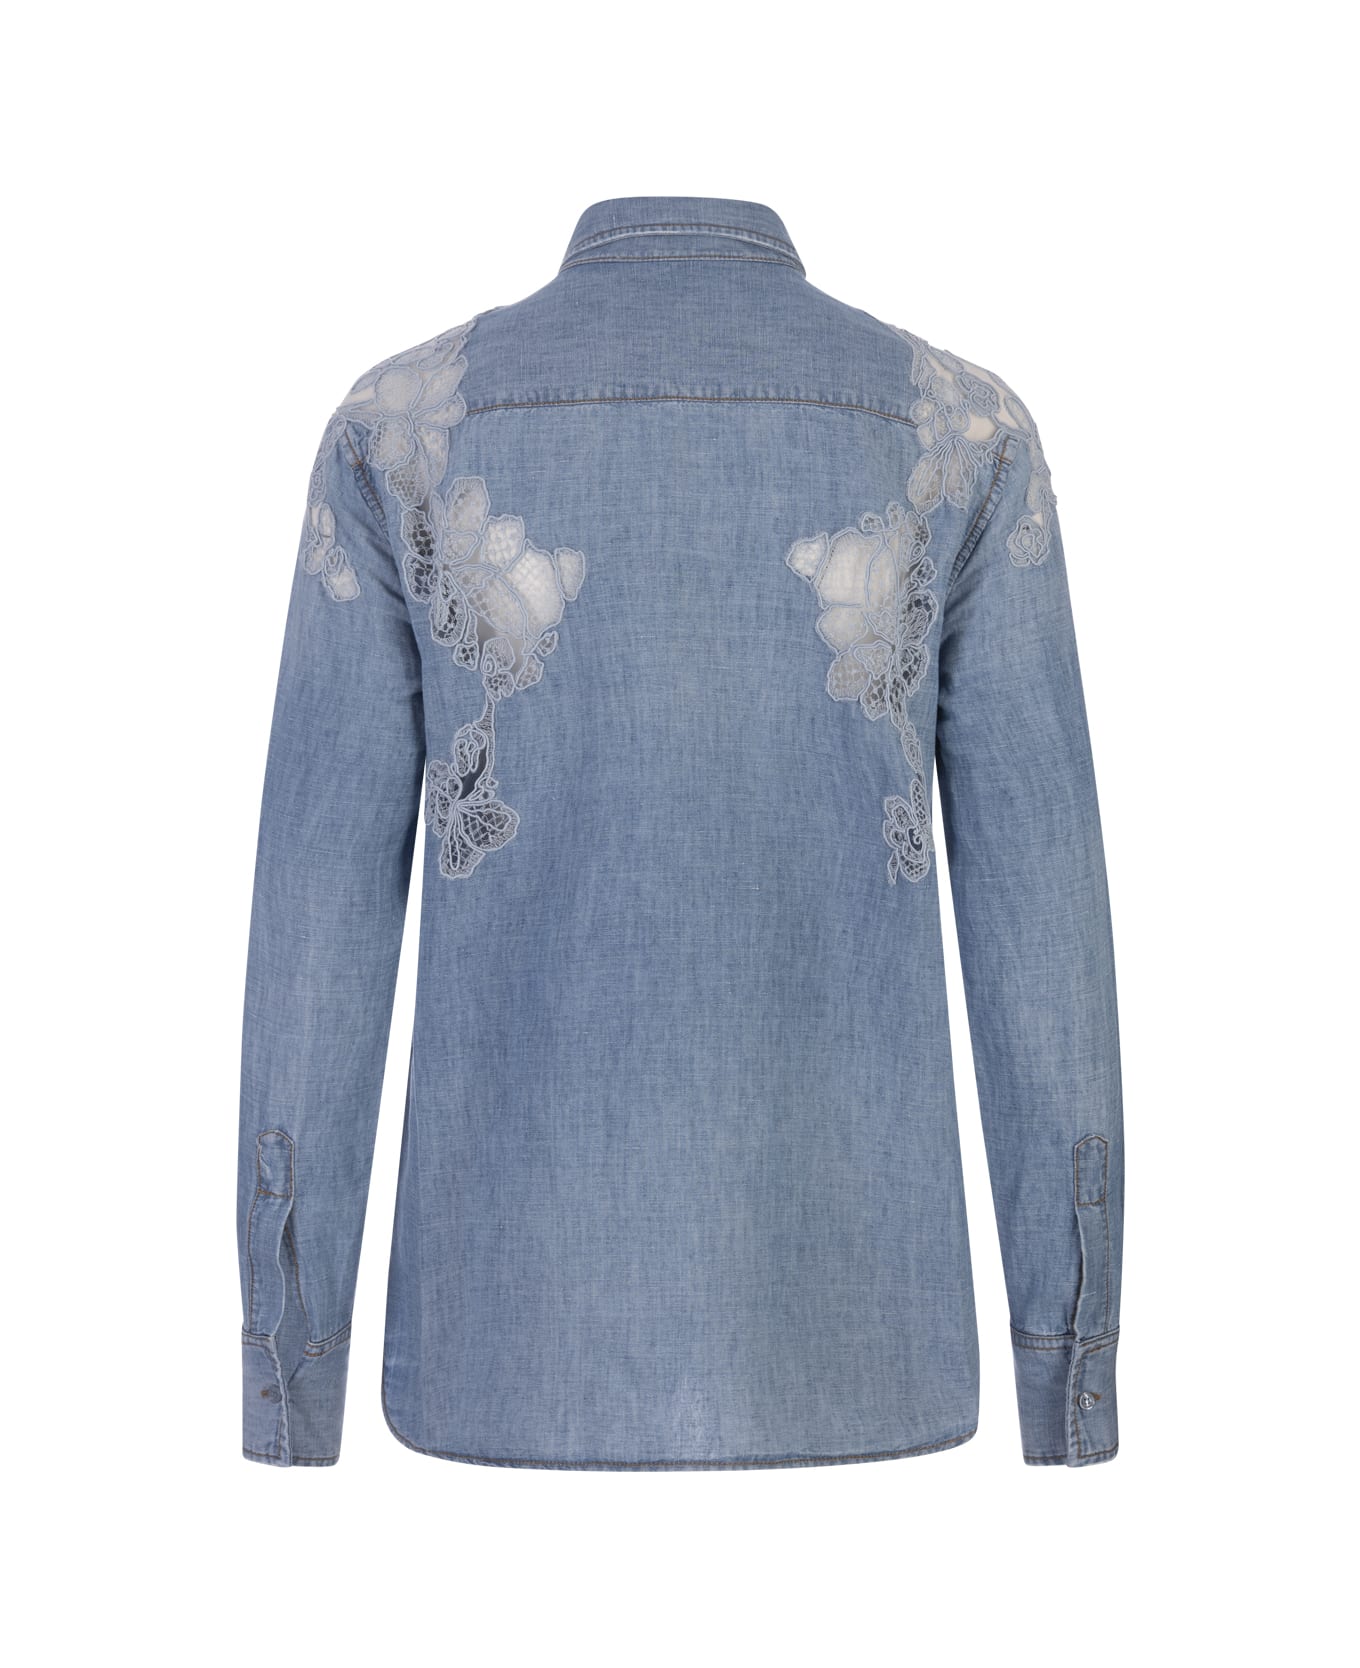 Ermanno Scervino Jeans Shirt With Lace - Blue